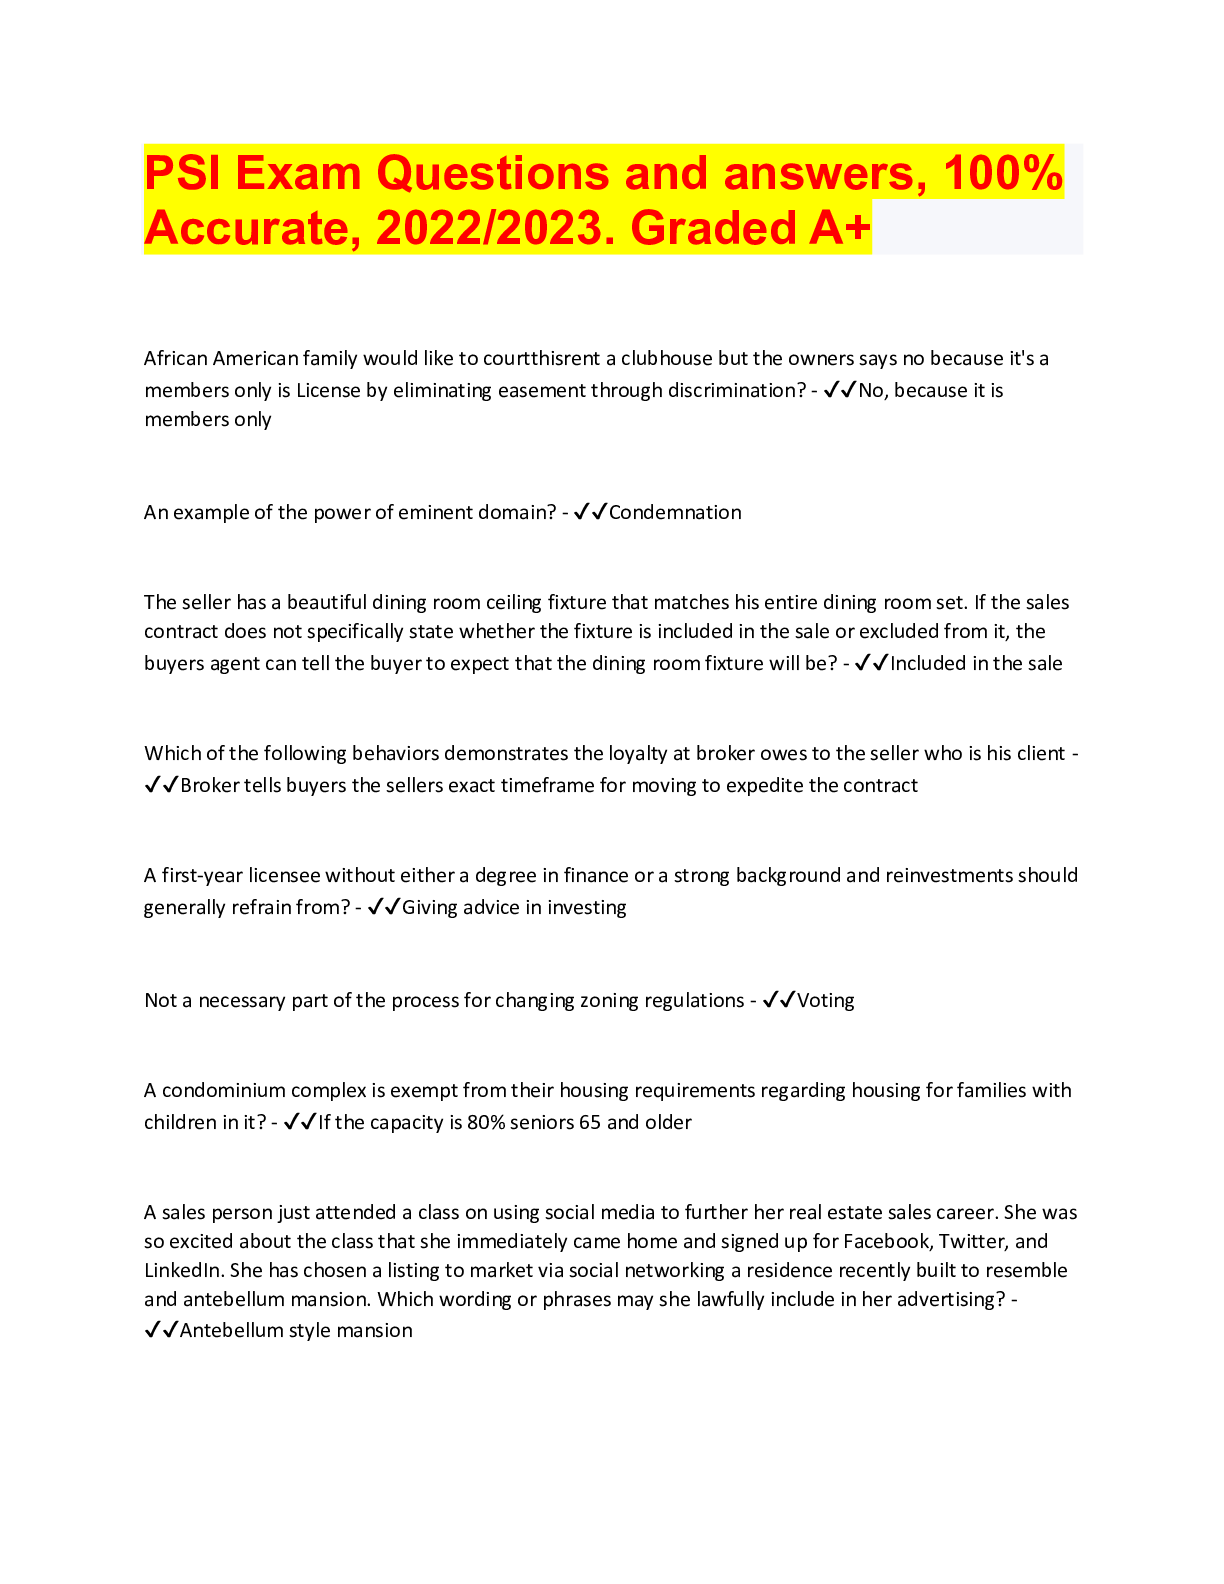 PSI Exam Questions and answers, 100 Accurate, 2022/2023. Graded A+